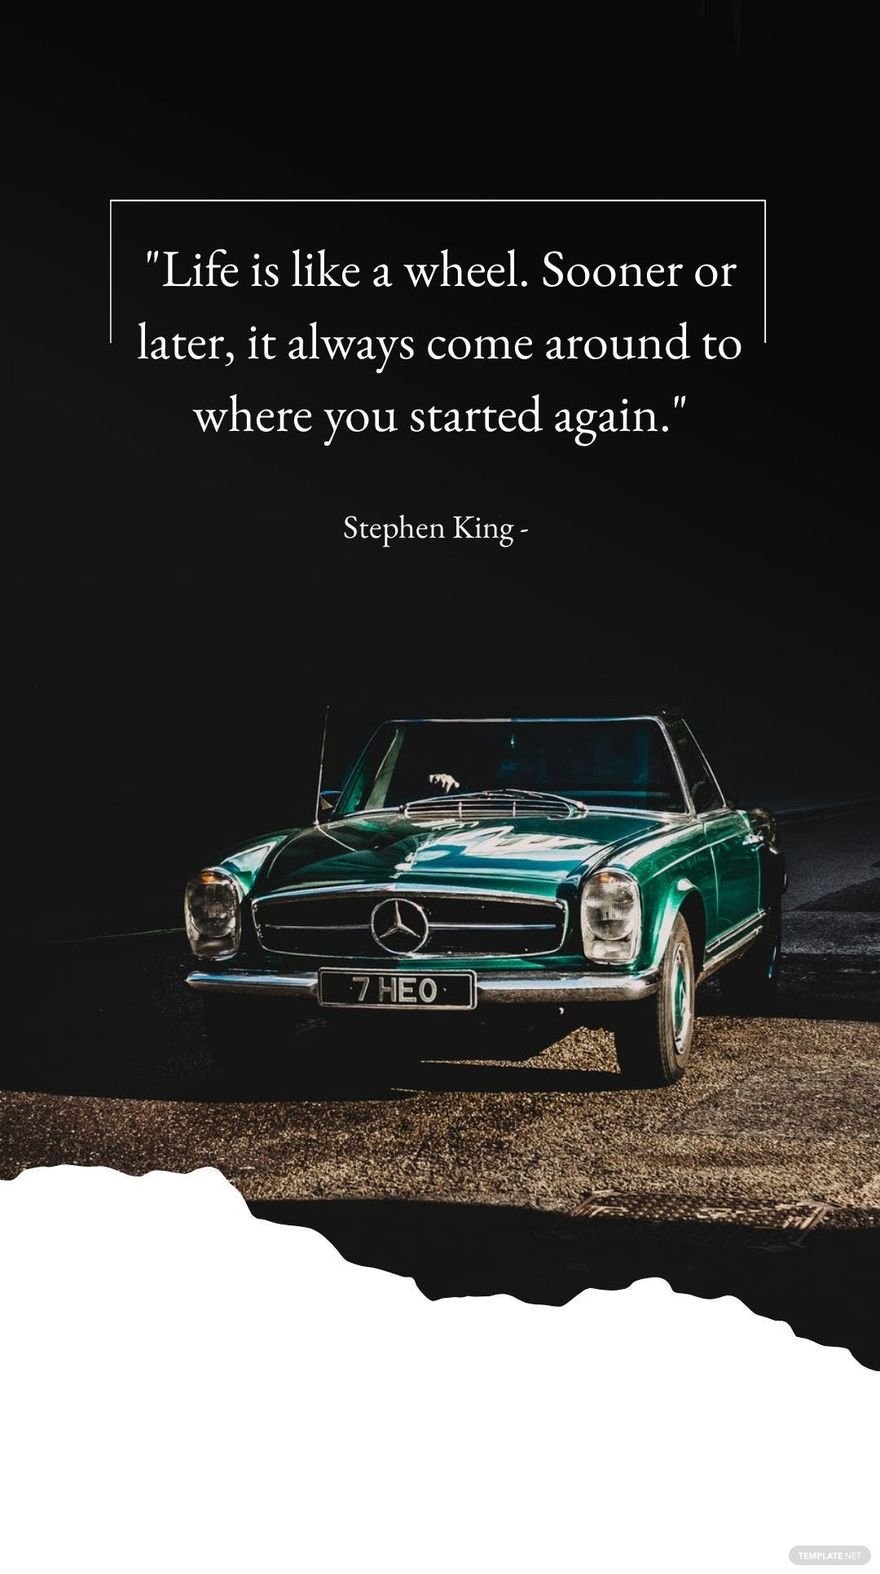 Stephen King - Life is like a wheel. Sooner or later, it always come around to where you started again.